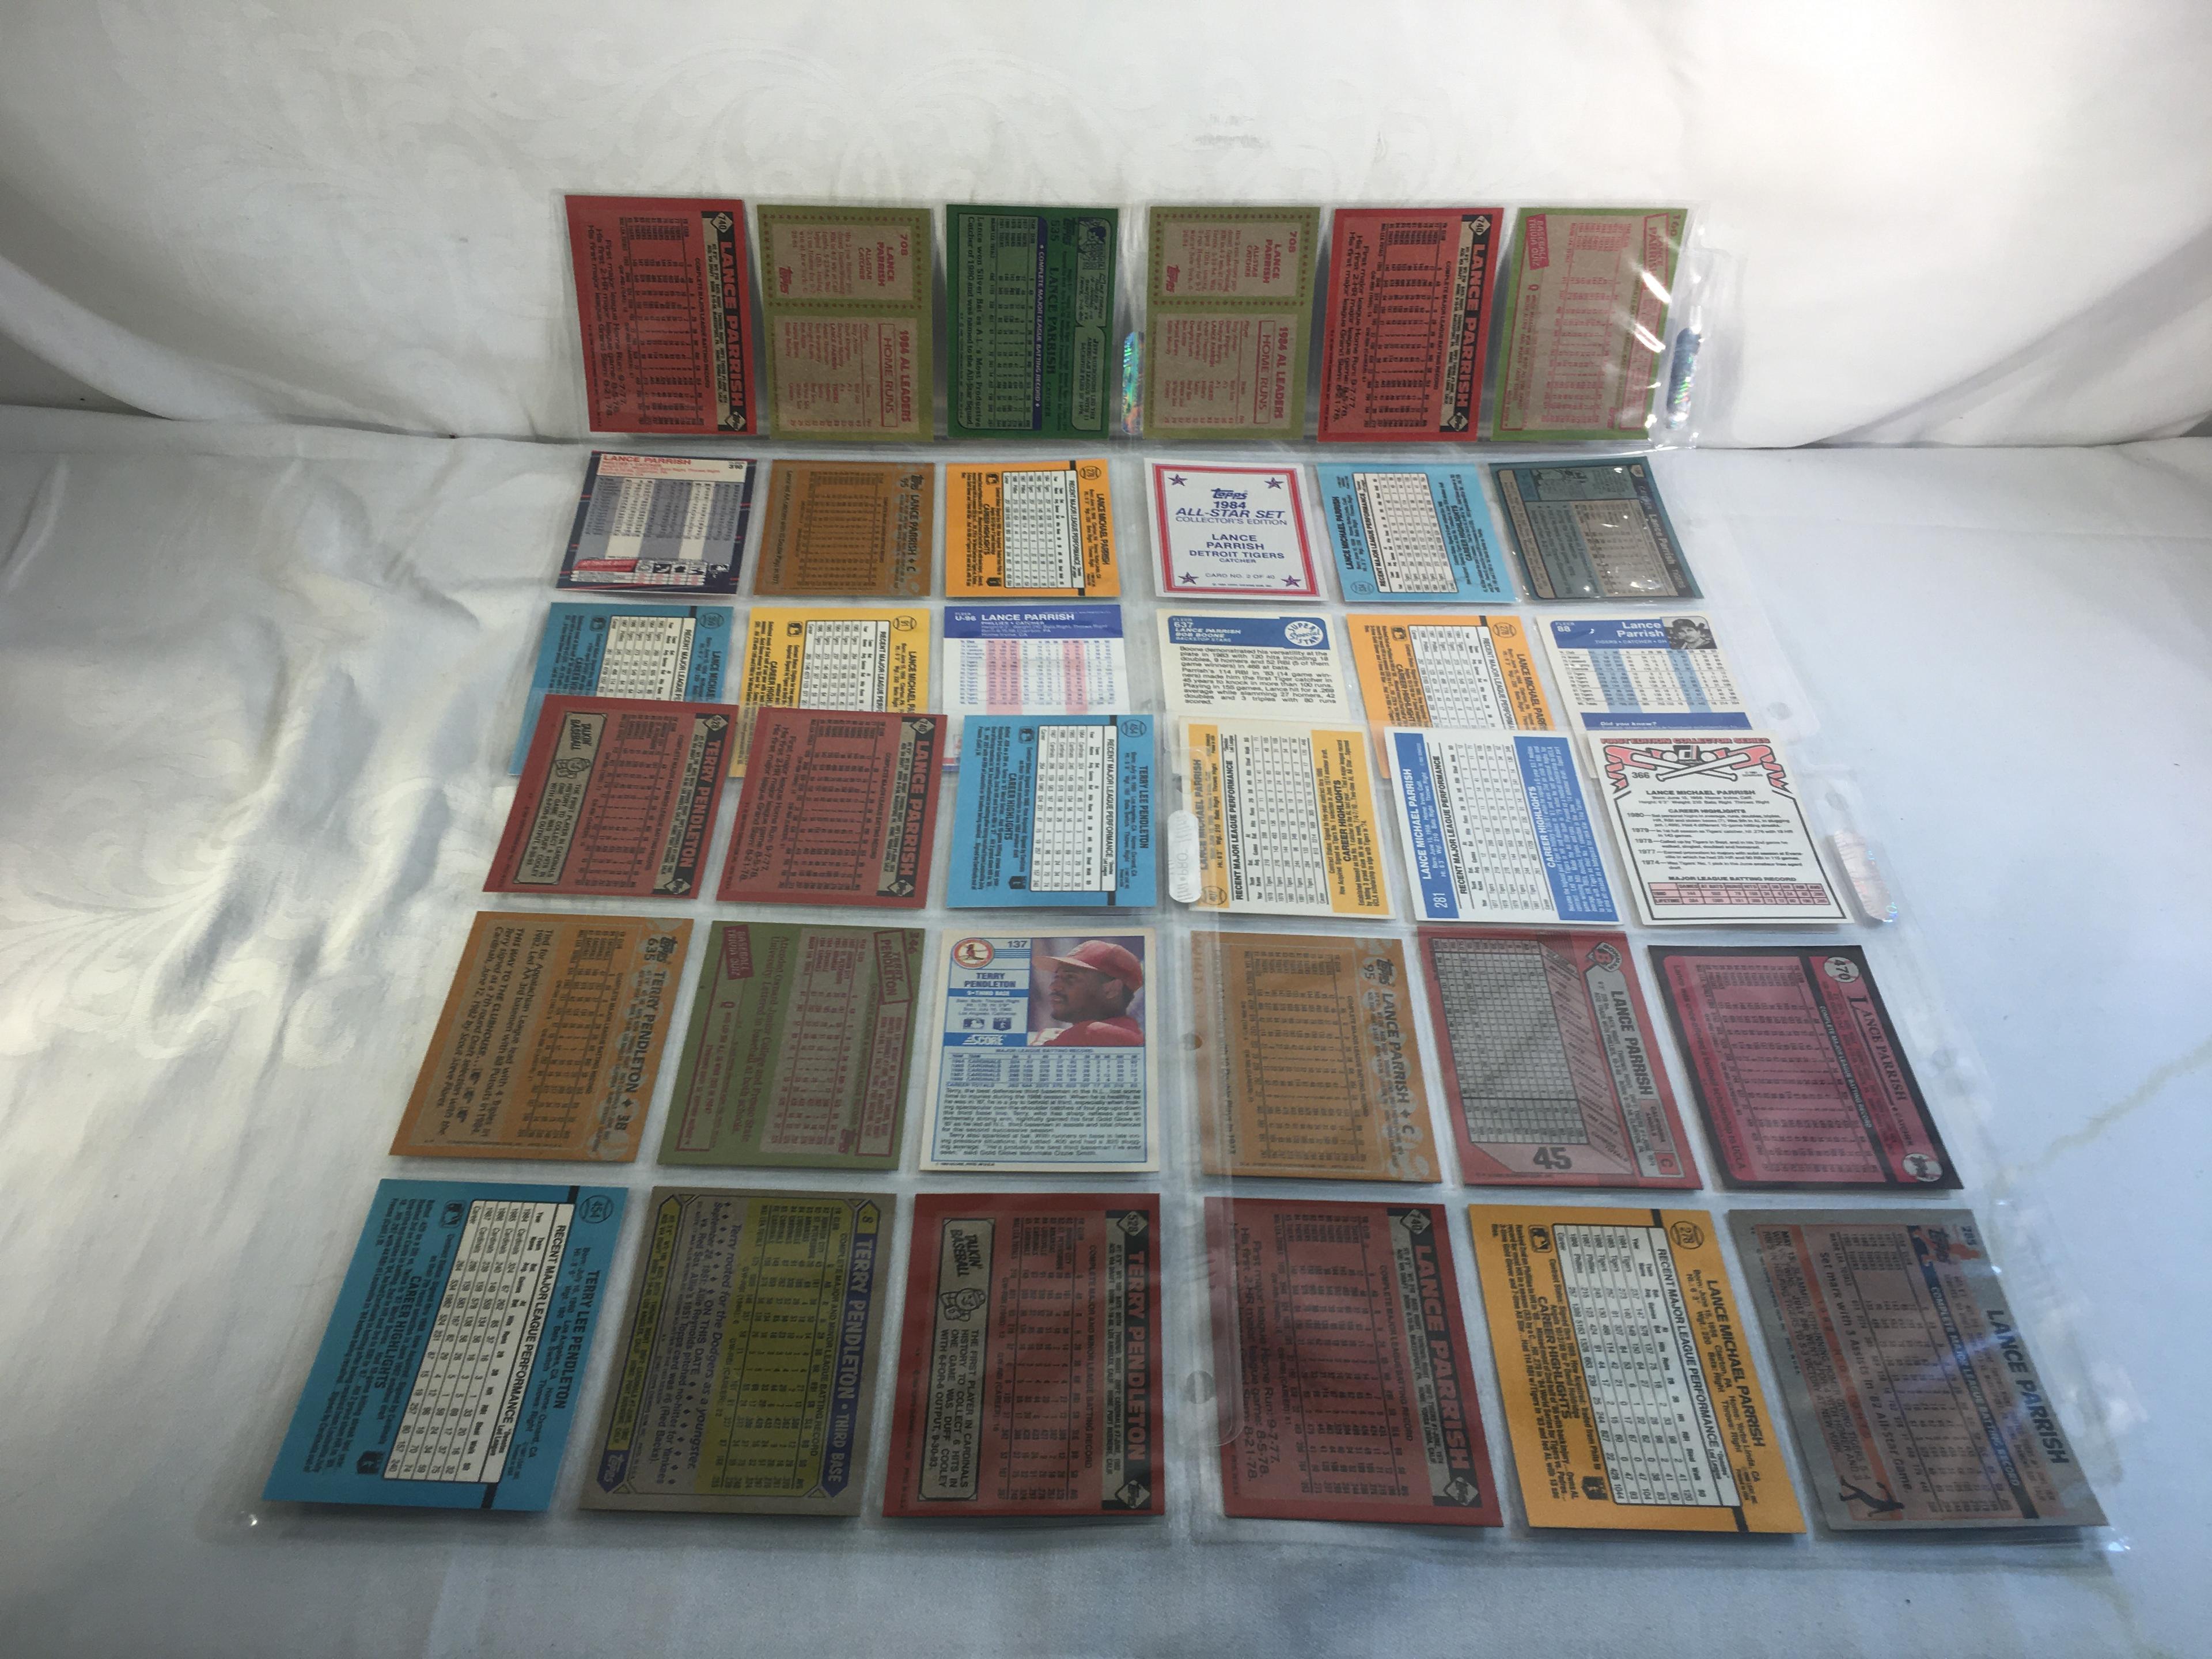 Lot of 36 pcs Collector Modern/Vintage Sport Baseball Trading Assorted Cards & Players - See Picture